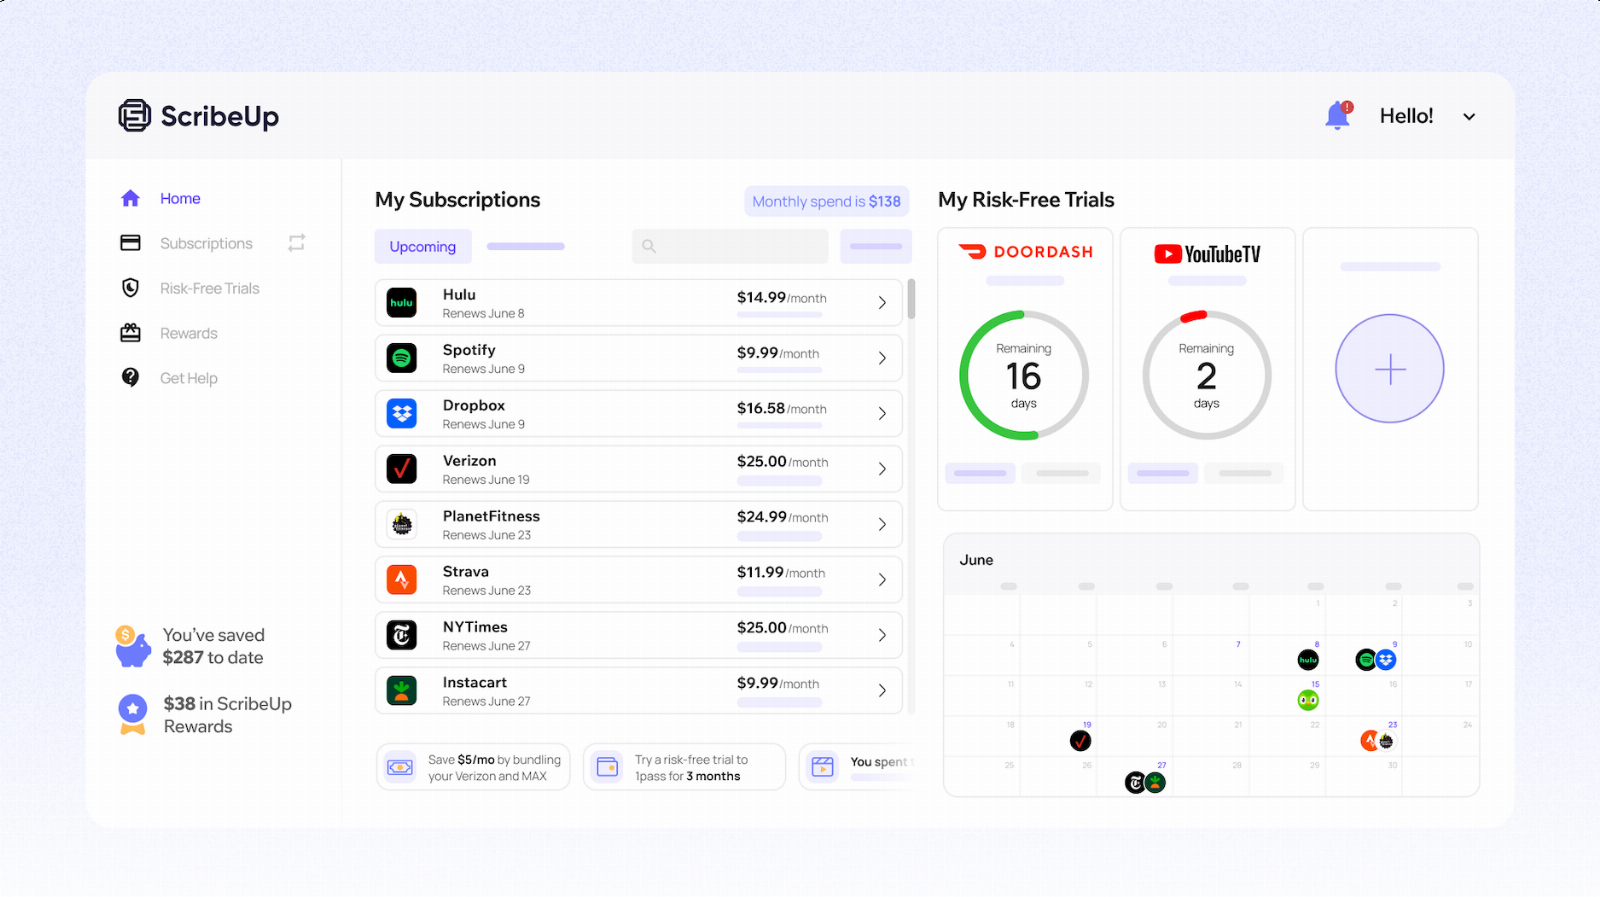 Mucker Capital backs ScribeUp’s ‘fully-automated’ approach to managing subscriptions